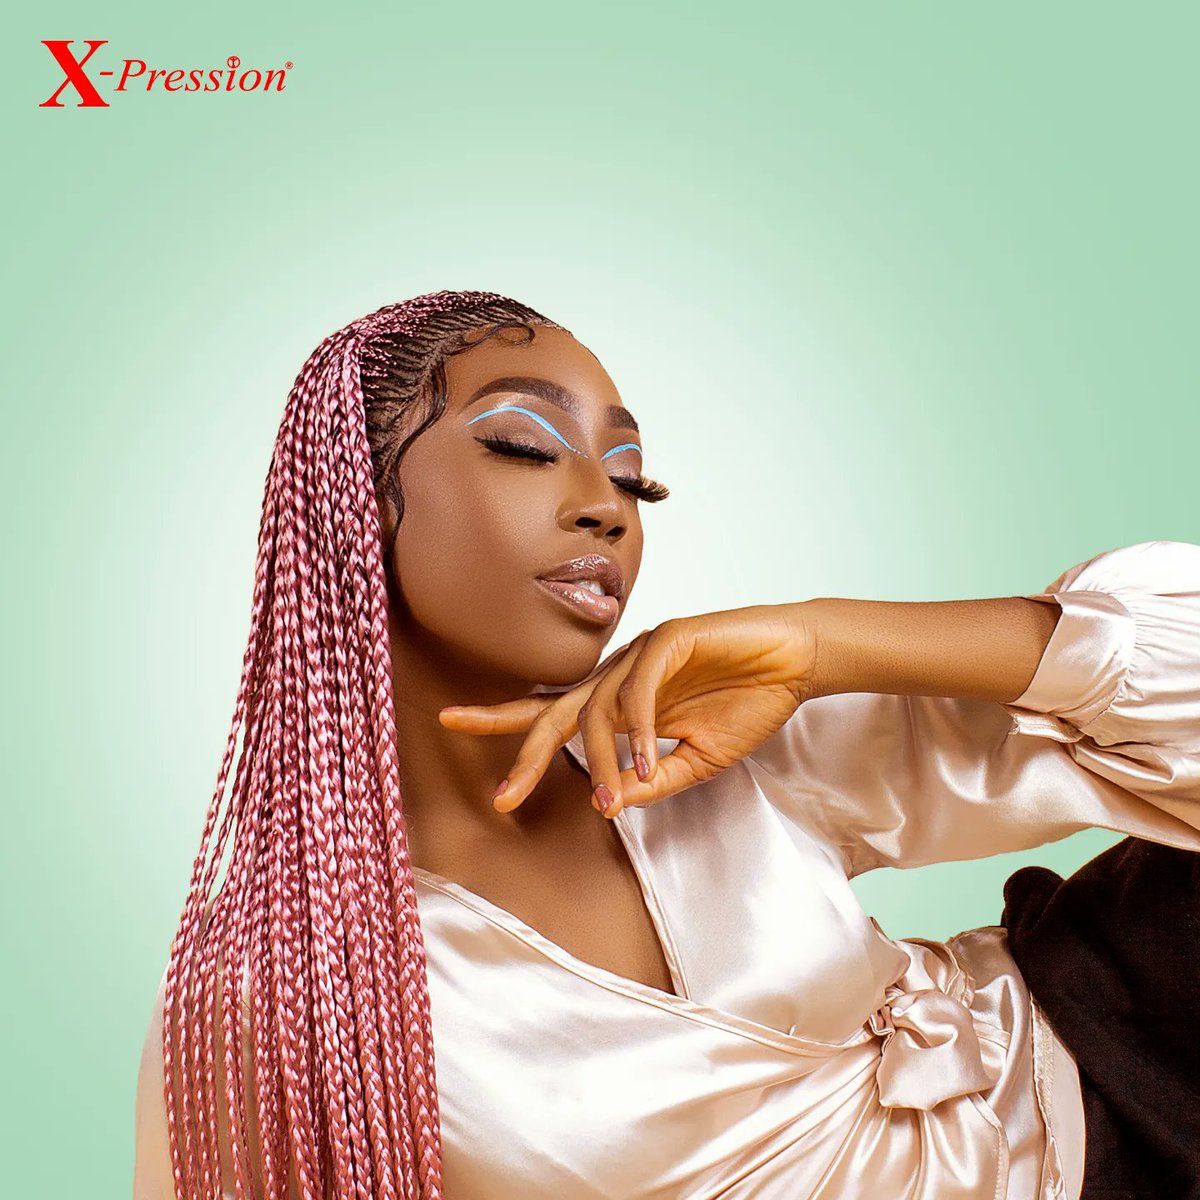 Every strand tells a story of confidence, creativity, and strength. Weaving dreams into reality, one braid at a time. 💖 Embrace your inner goddess with our impeccable braids! 💁‍♀️✨ #xp4you #xpression #xpressionhair #braids #BraidGoals #RichBraid #style #Wednesday